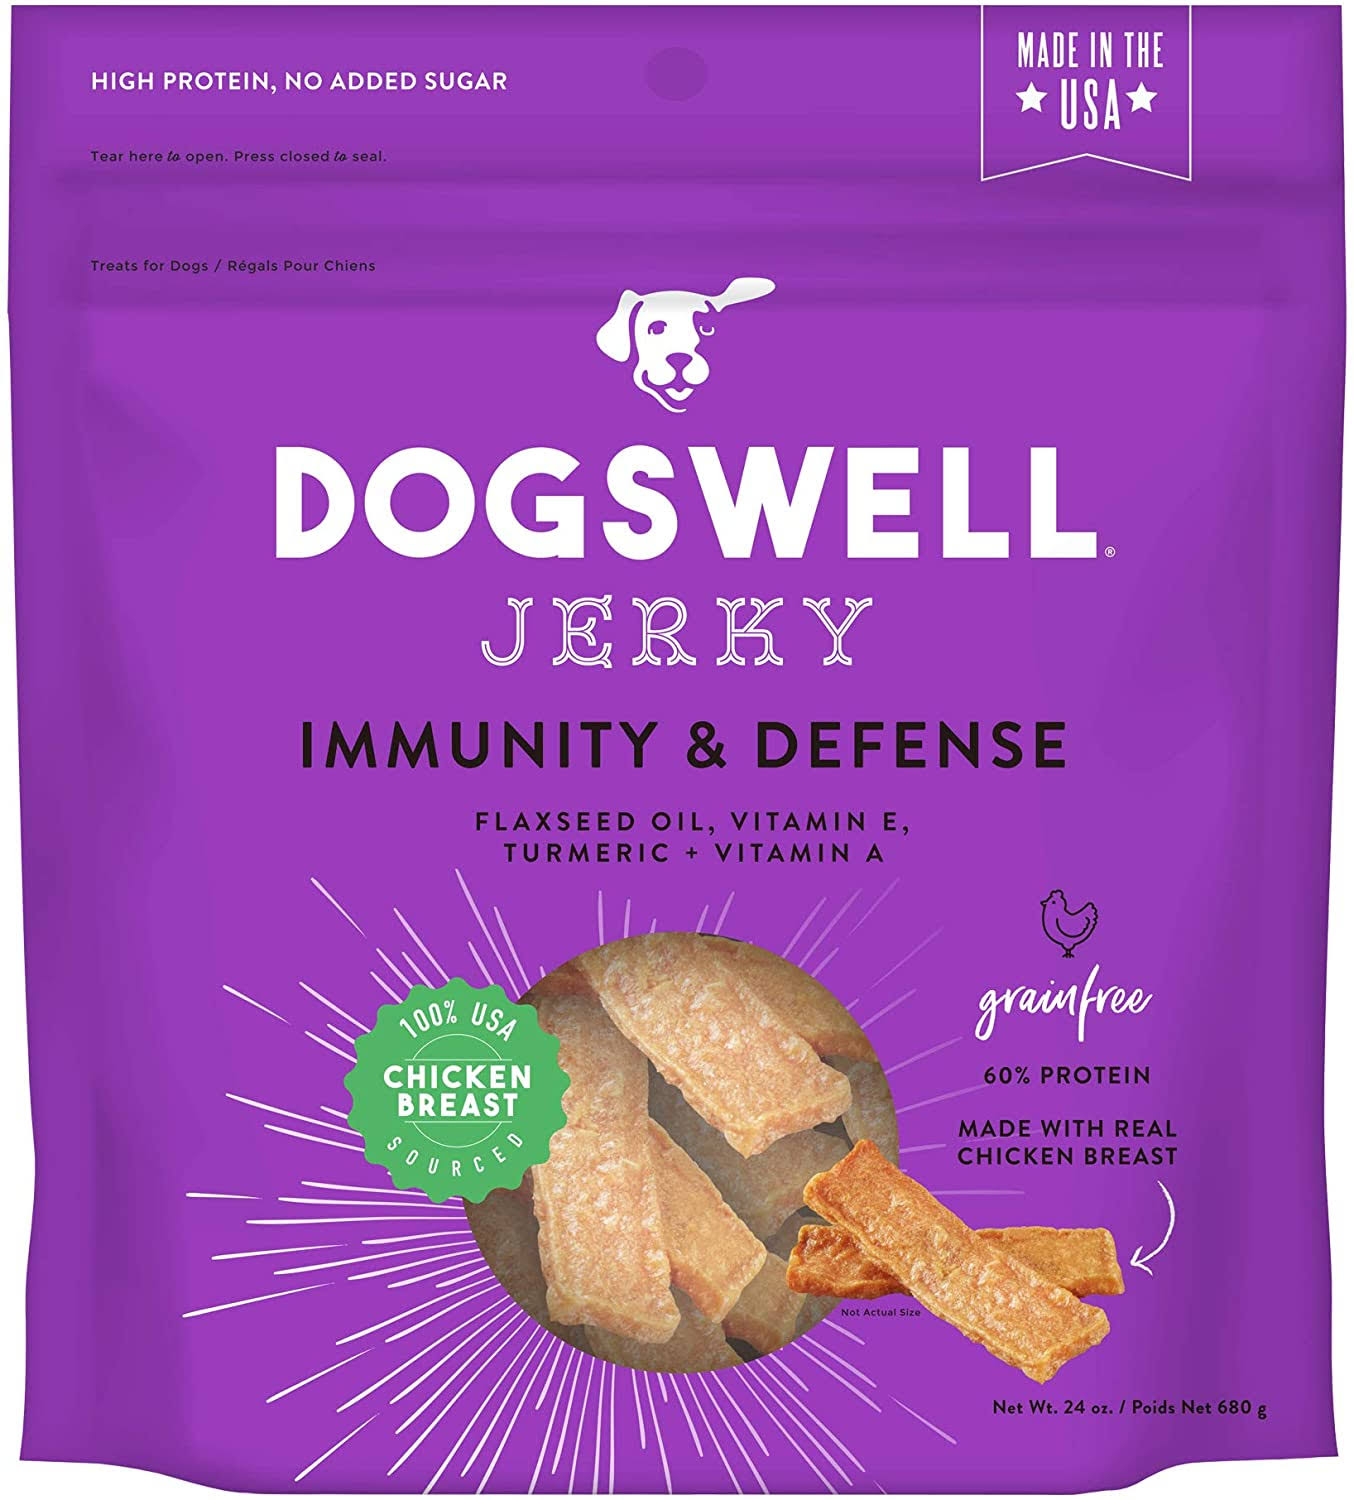 DOGSWELL 100% Meat Jerky Treats for Dogs, Made in The USA with